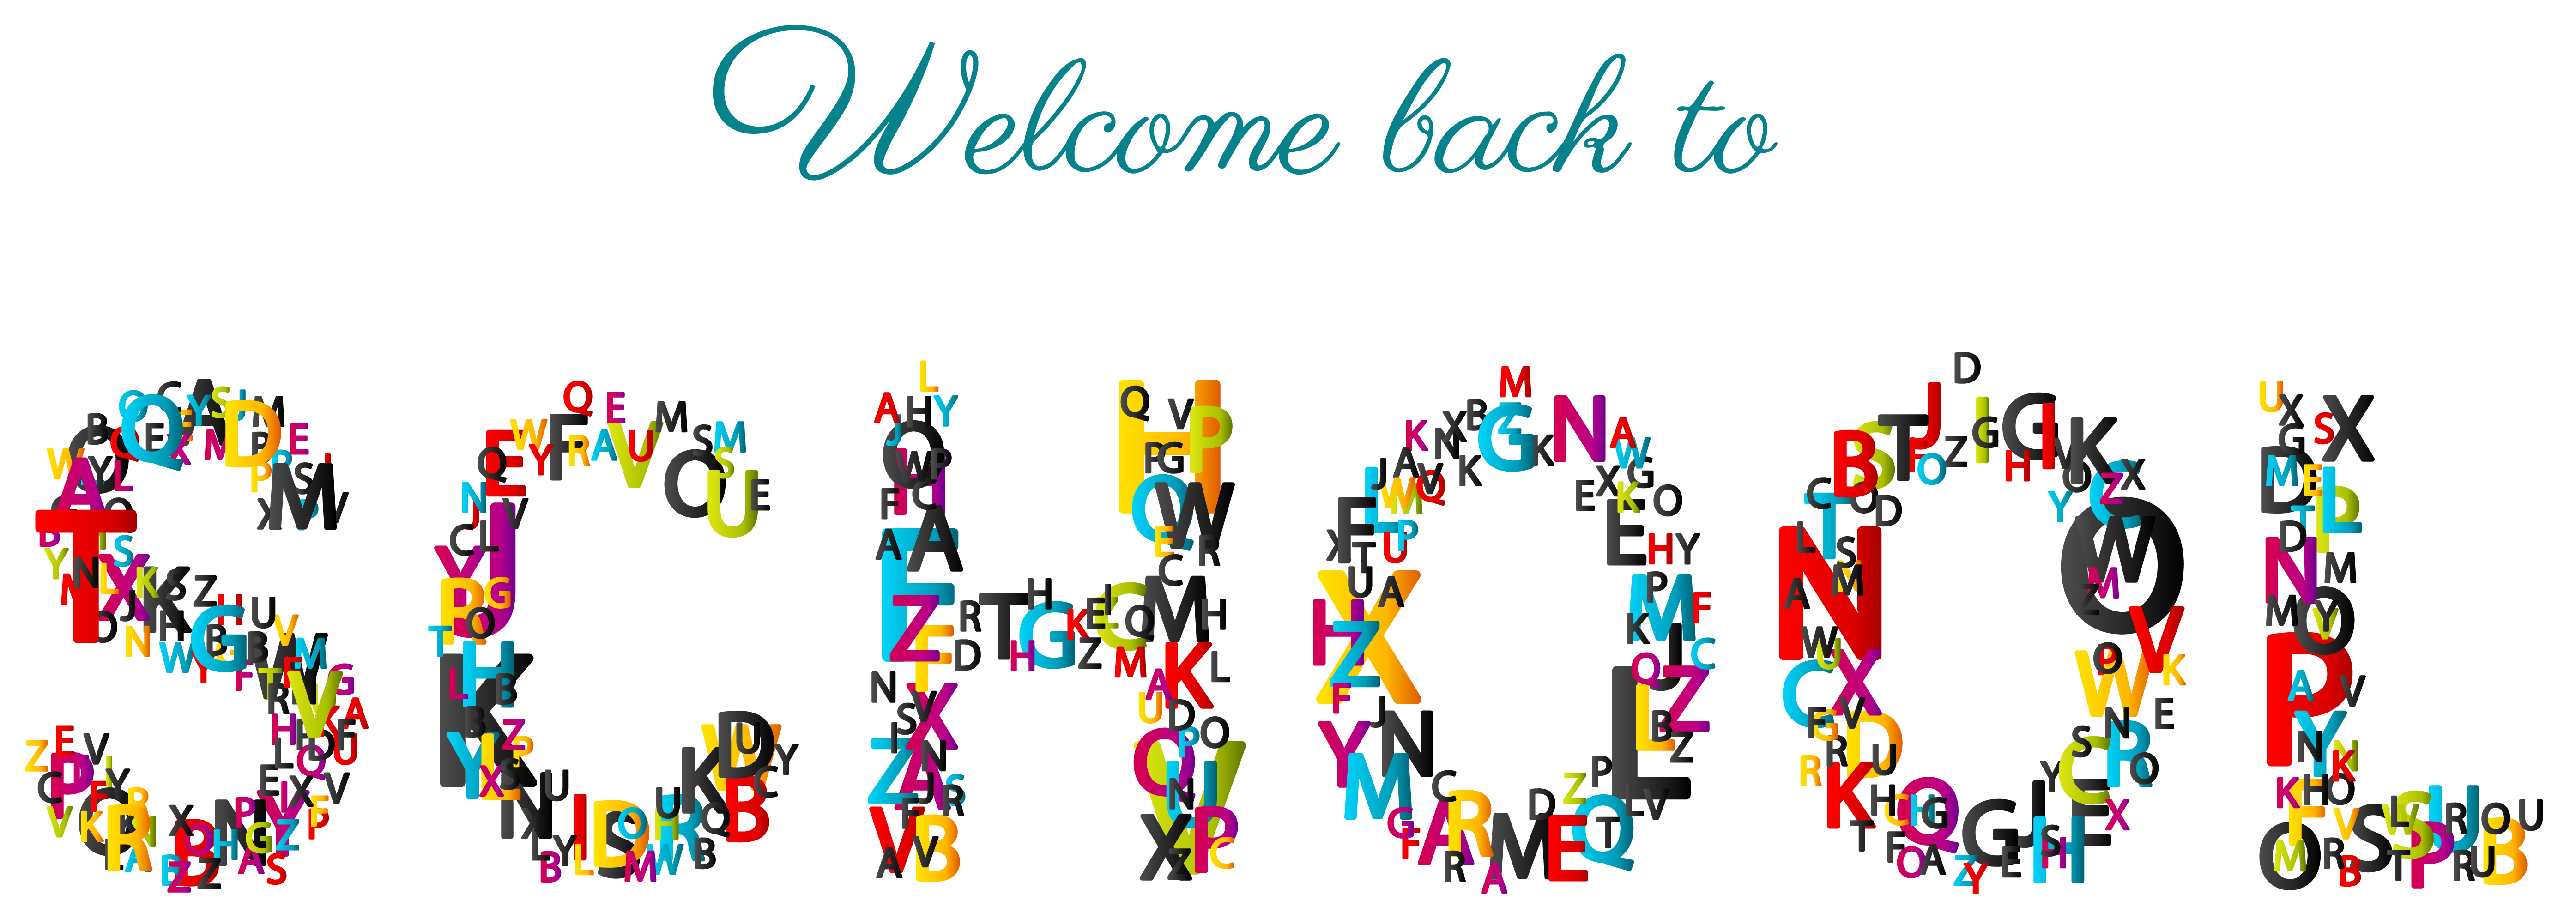 first day back to school clipart - photo #4